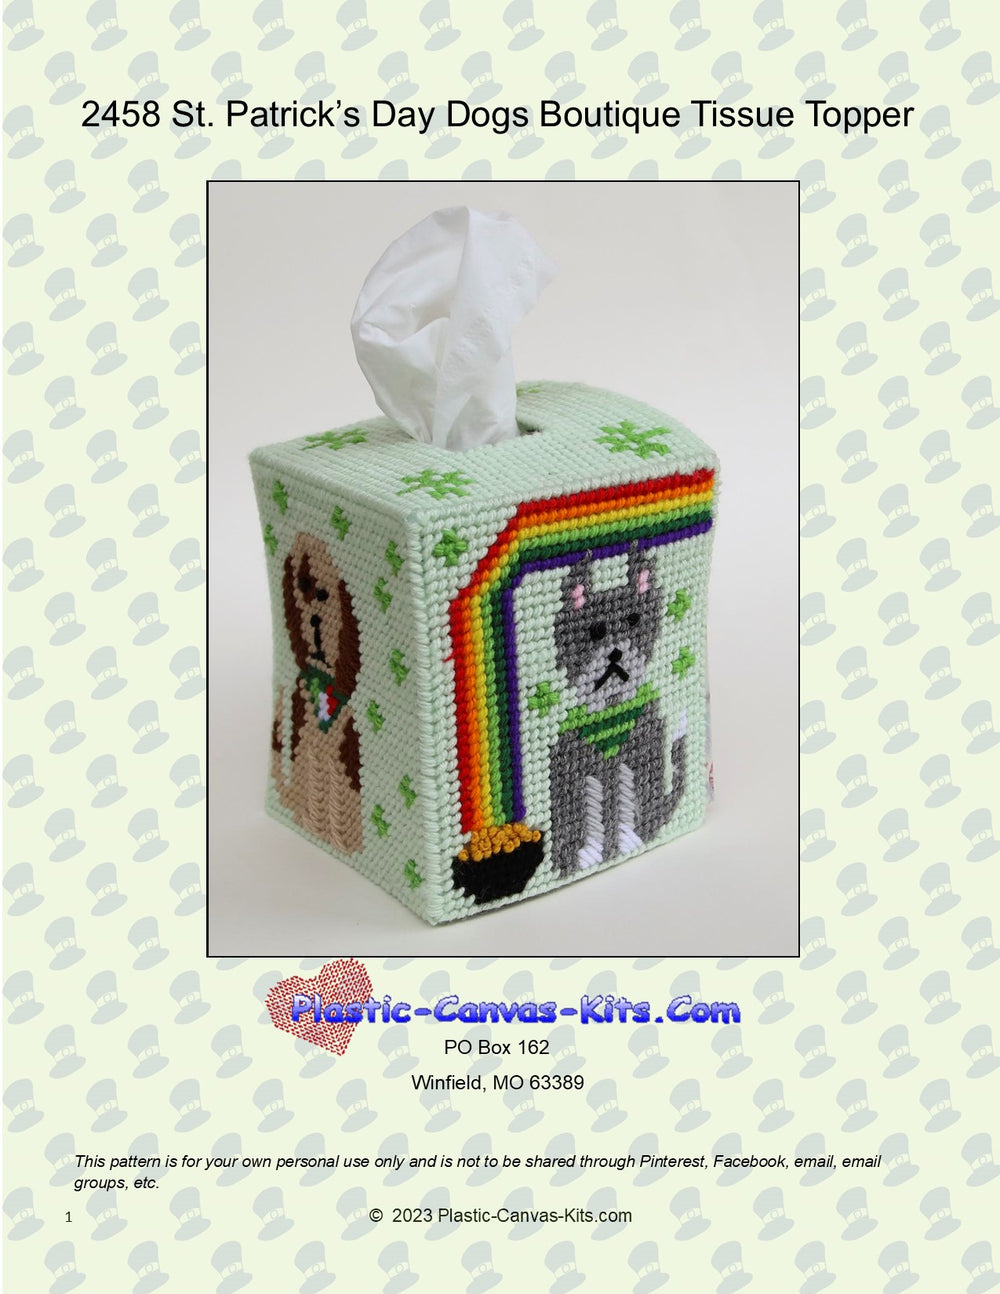 St. Patrick's Day Dogs Tissue Topper (Boutique)